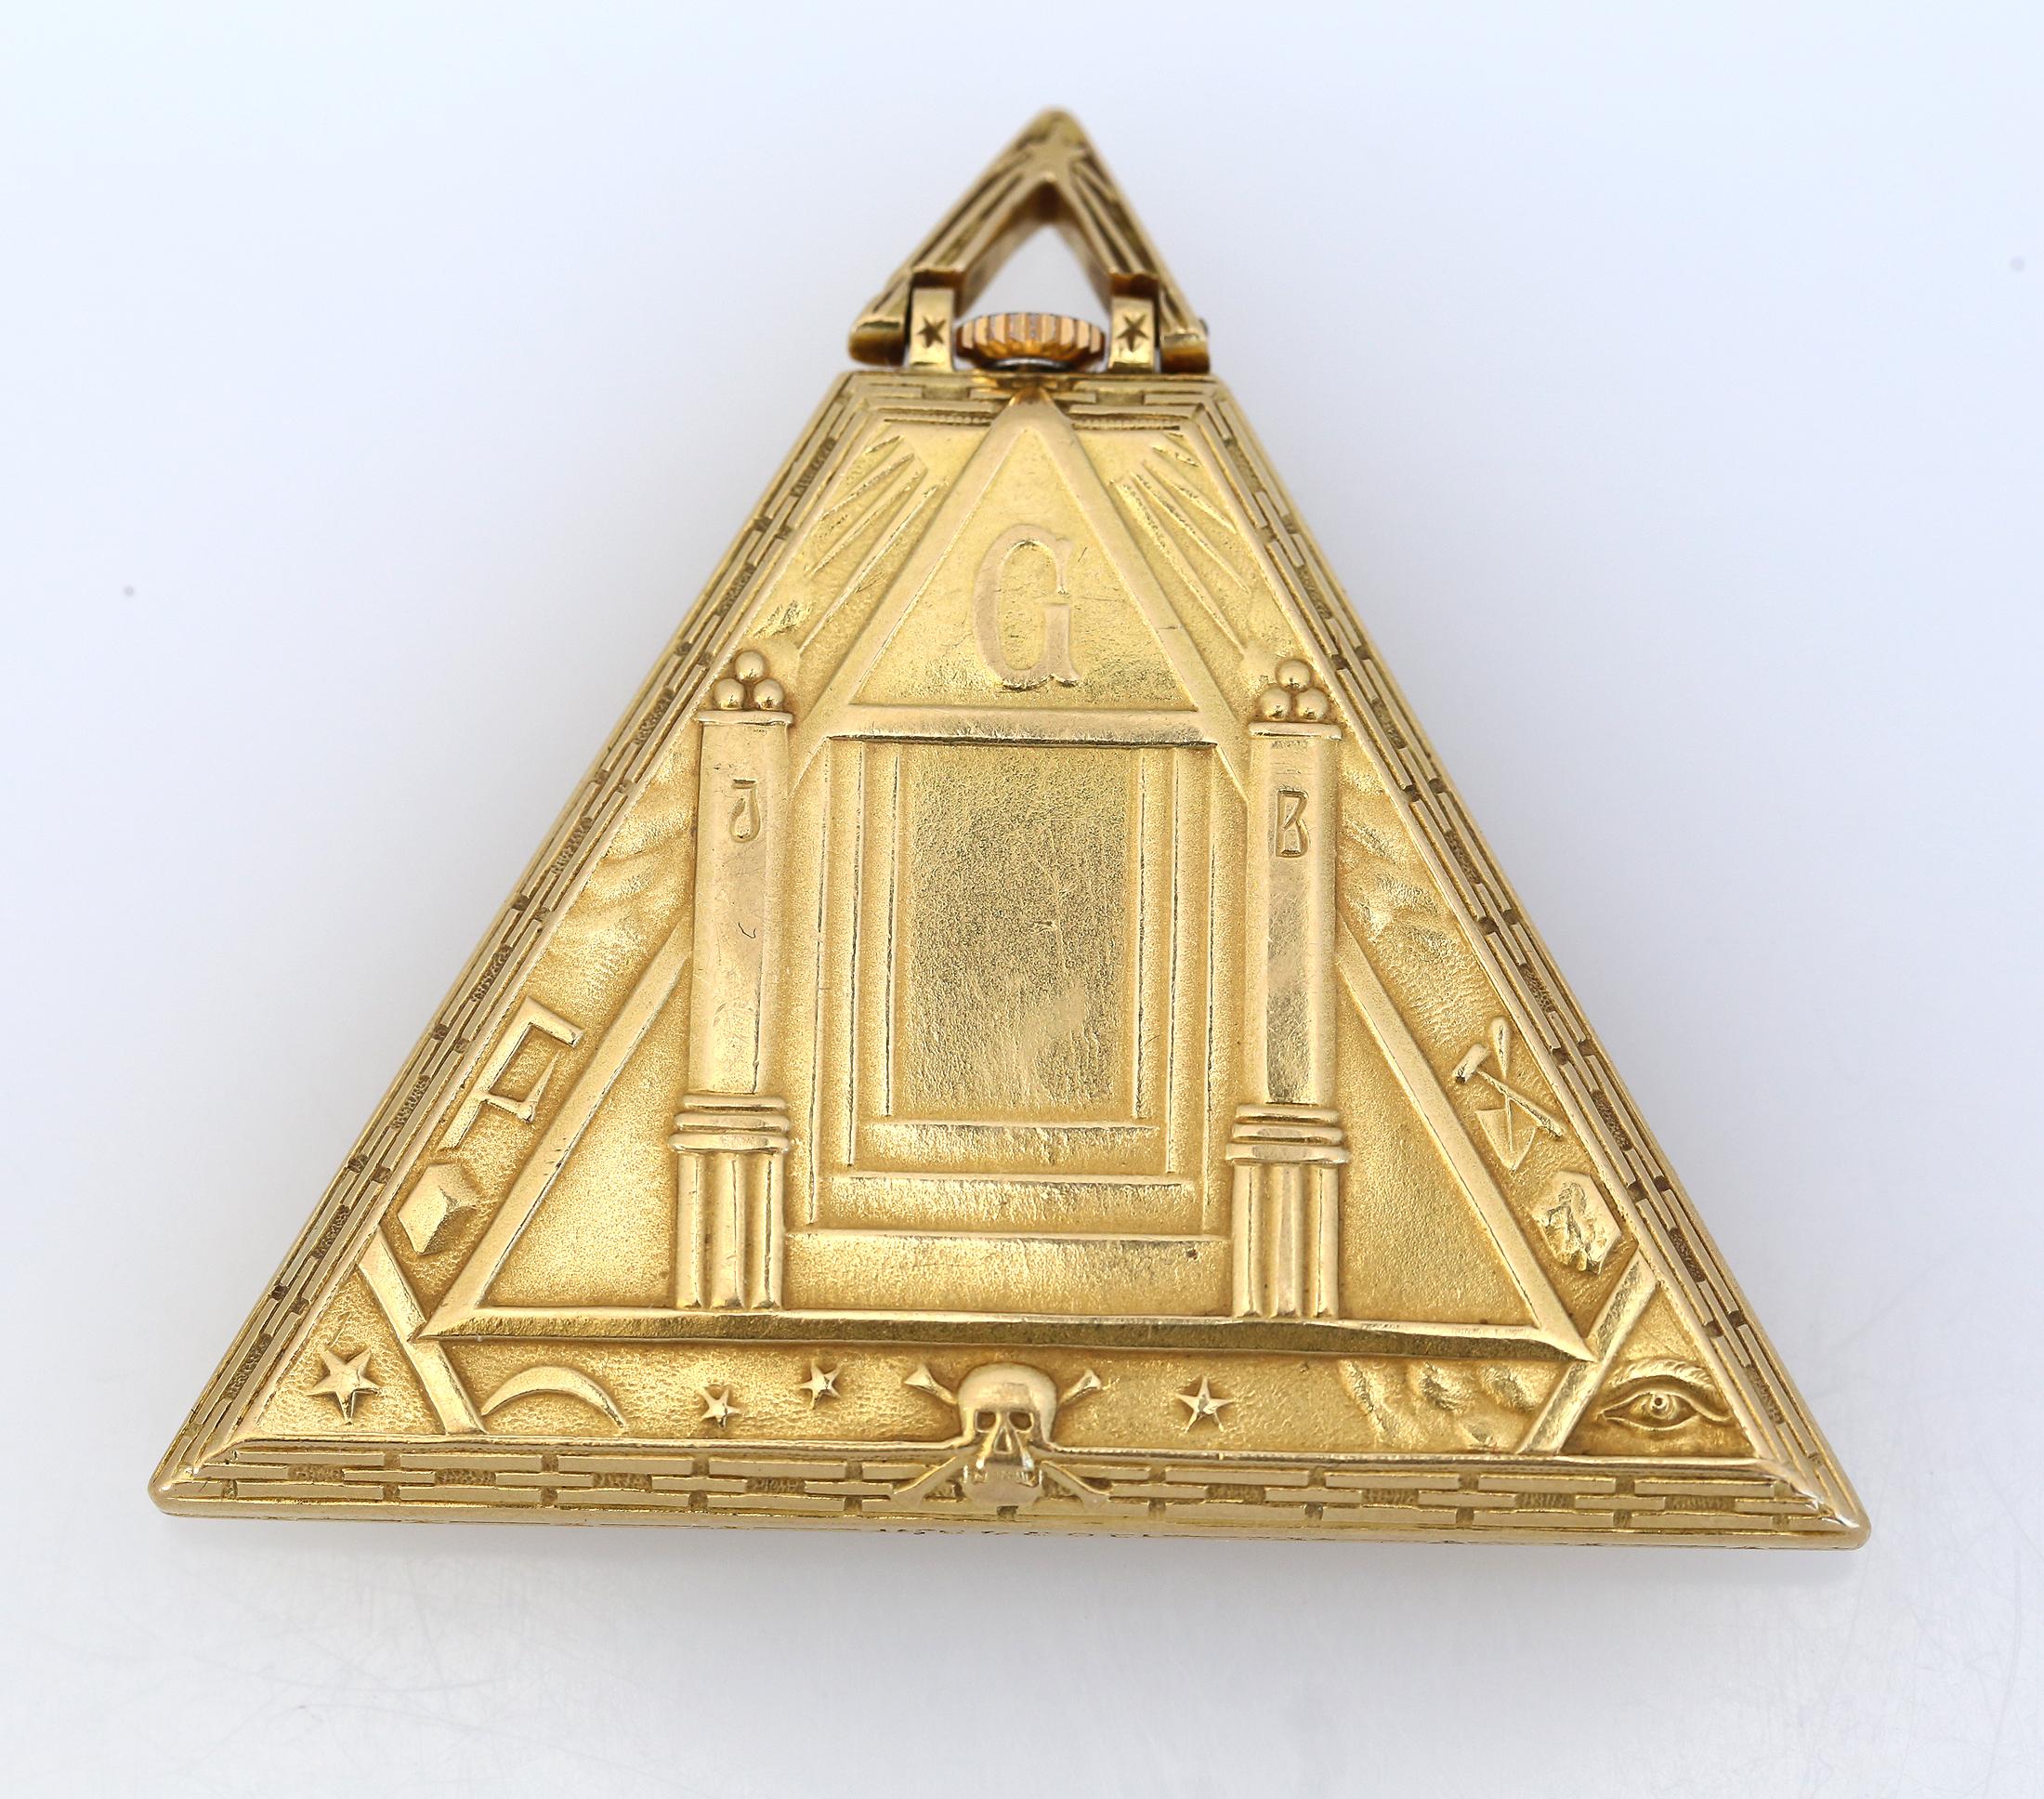 Art Deco Masoniс Triangle Pyramid Gold Watch Levrette Swiss, 1920

Extremely Rare Antique Masoniс Triangle Pyramid Gold Watch by Levrette Swiss. Highly collectable item, enamel dial with Masonic signs instead of numerals. Thermally blued hands look